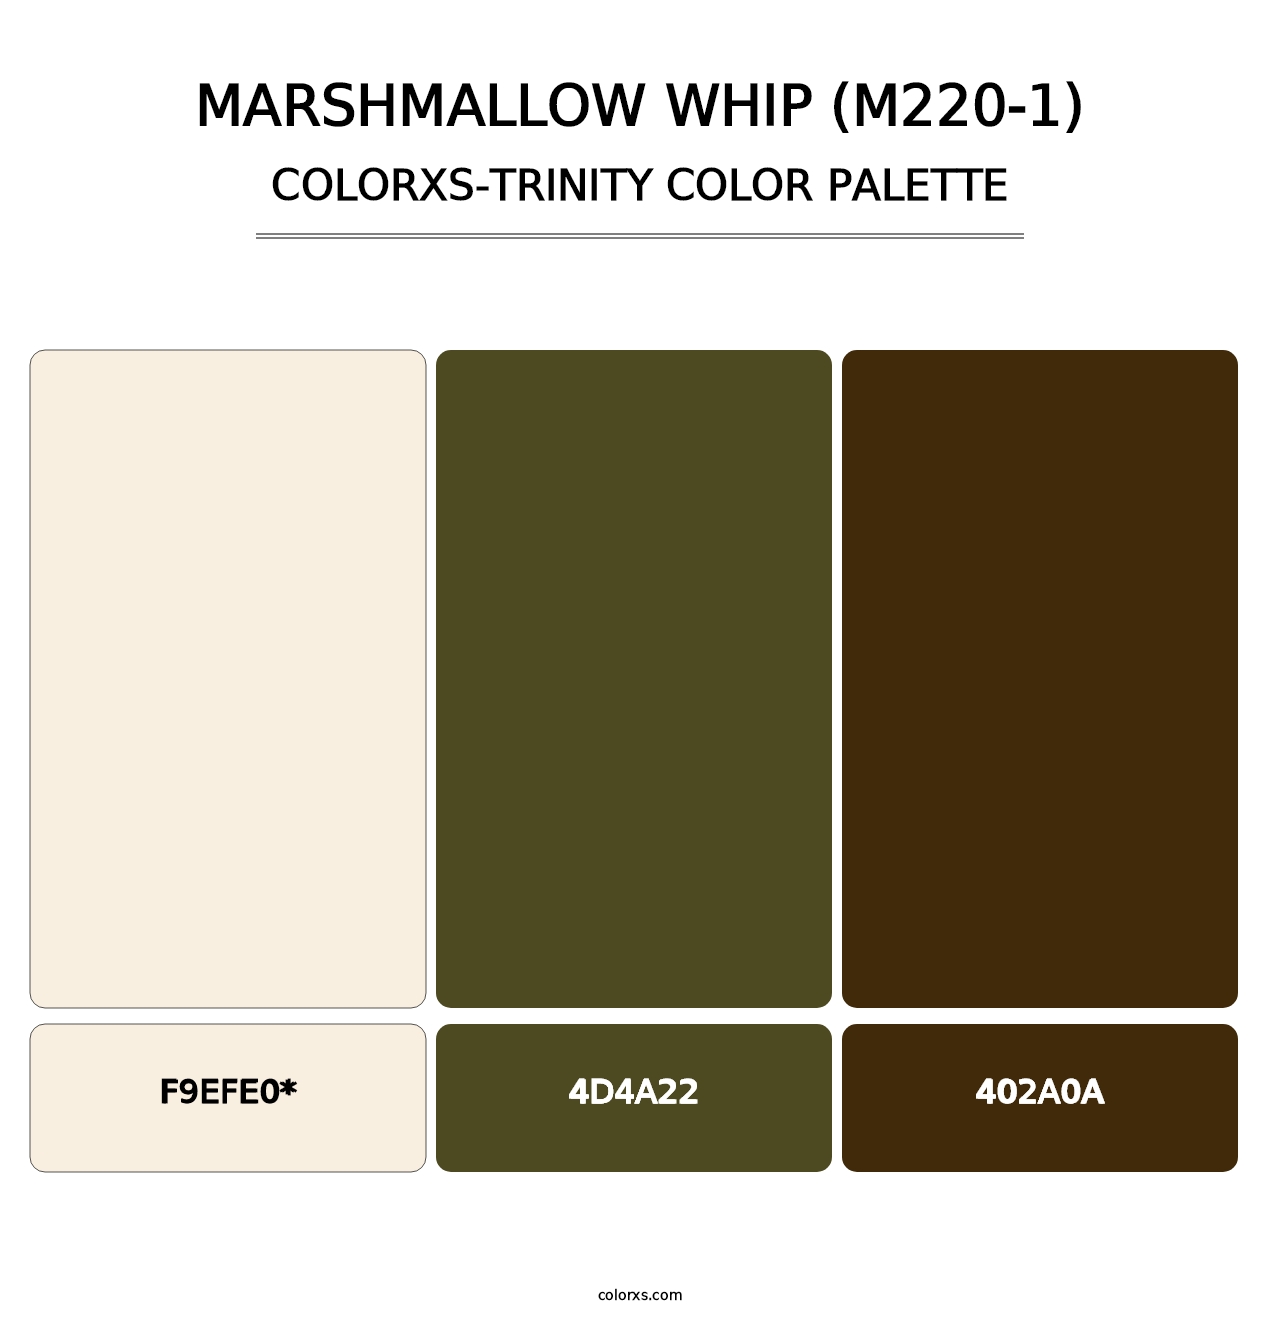 Marshmallow Whip (M220-1) - Colorxs Trinity Palette